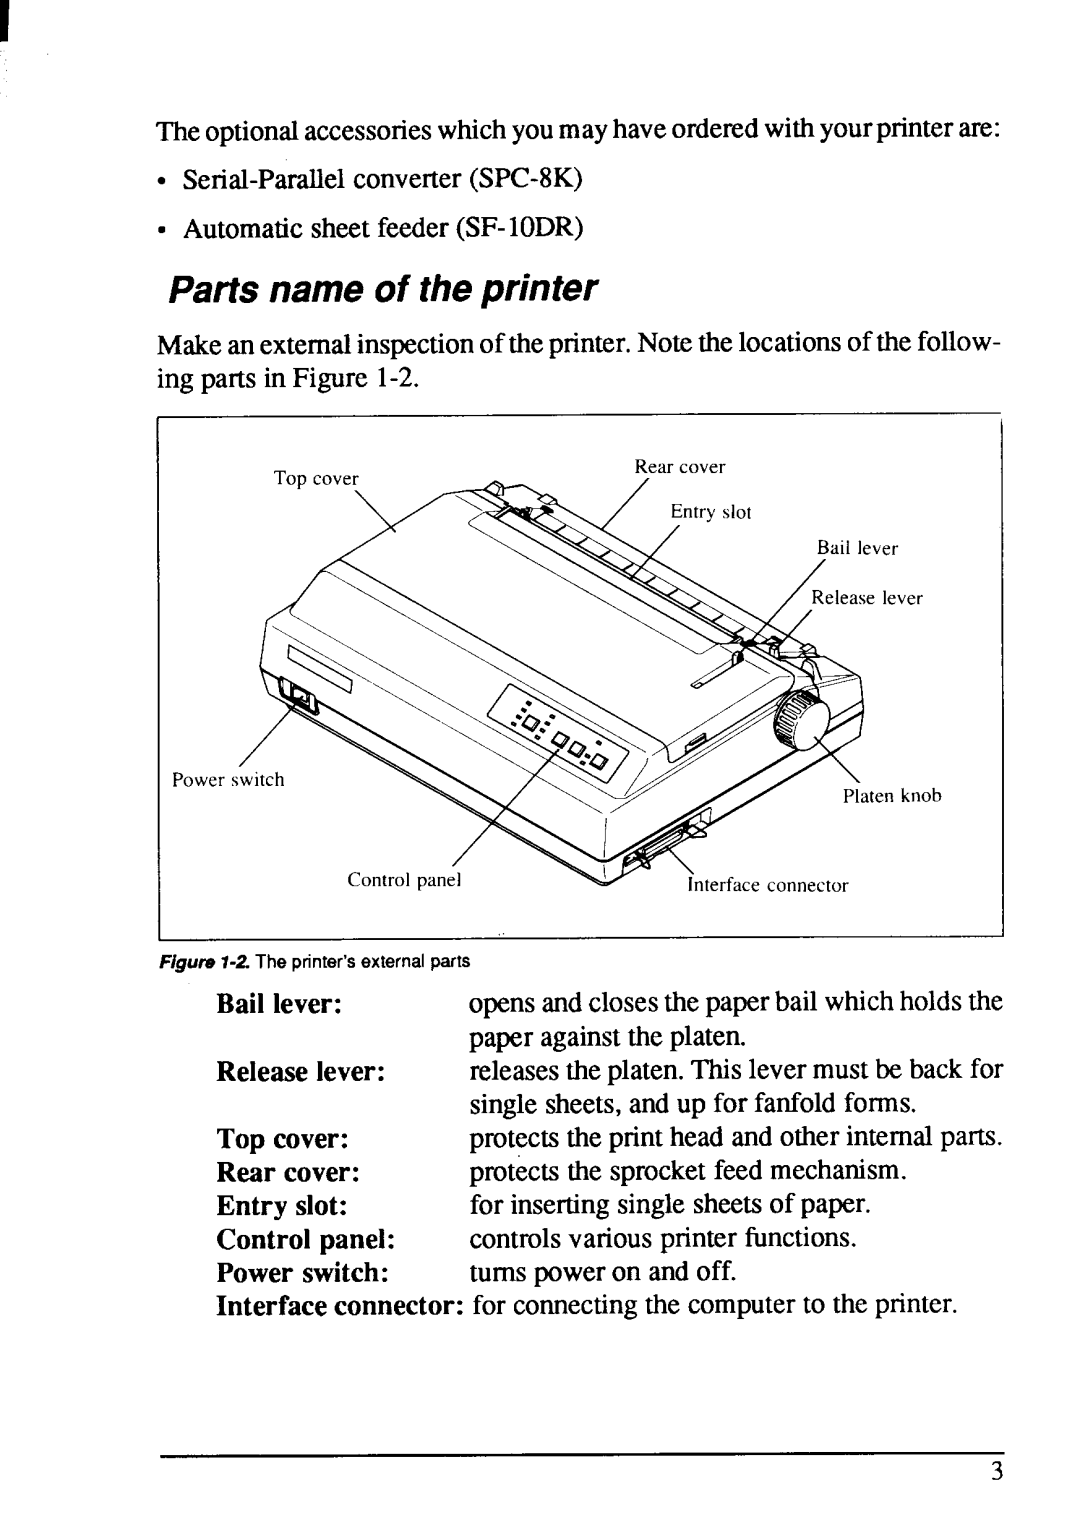 Star Micronics NX-1001 manual Parts name of theprinter, ‘owerswitch. O n 